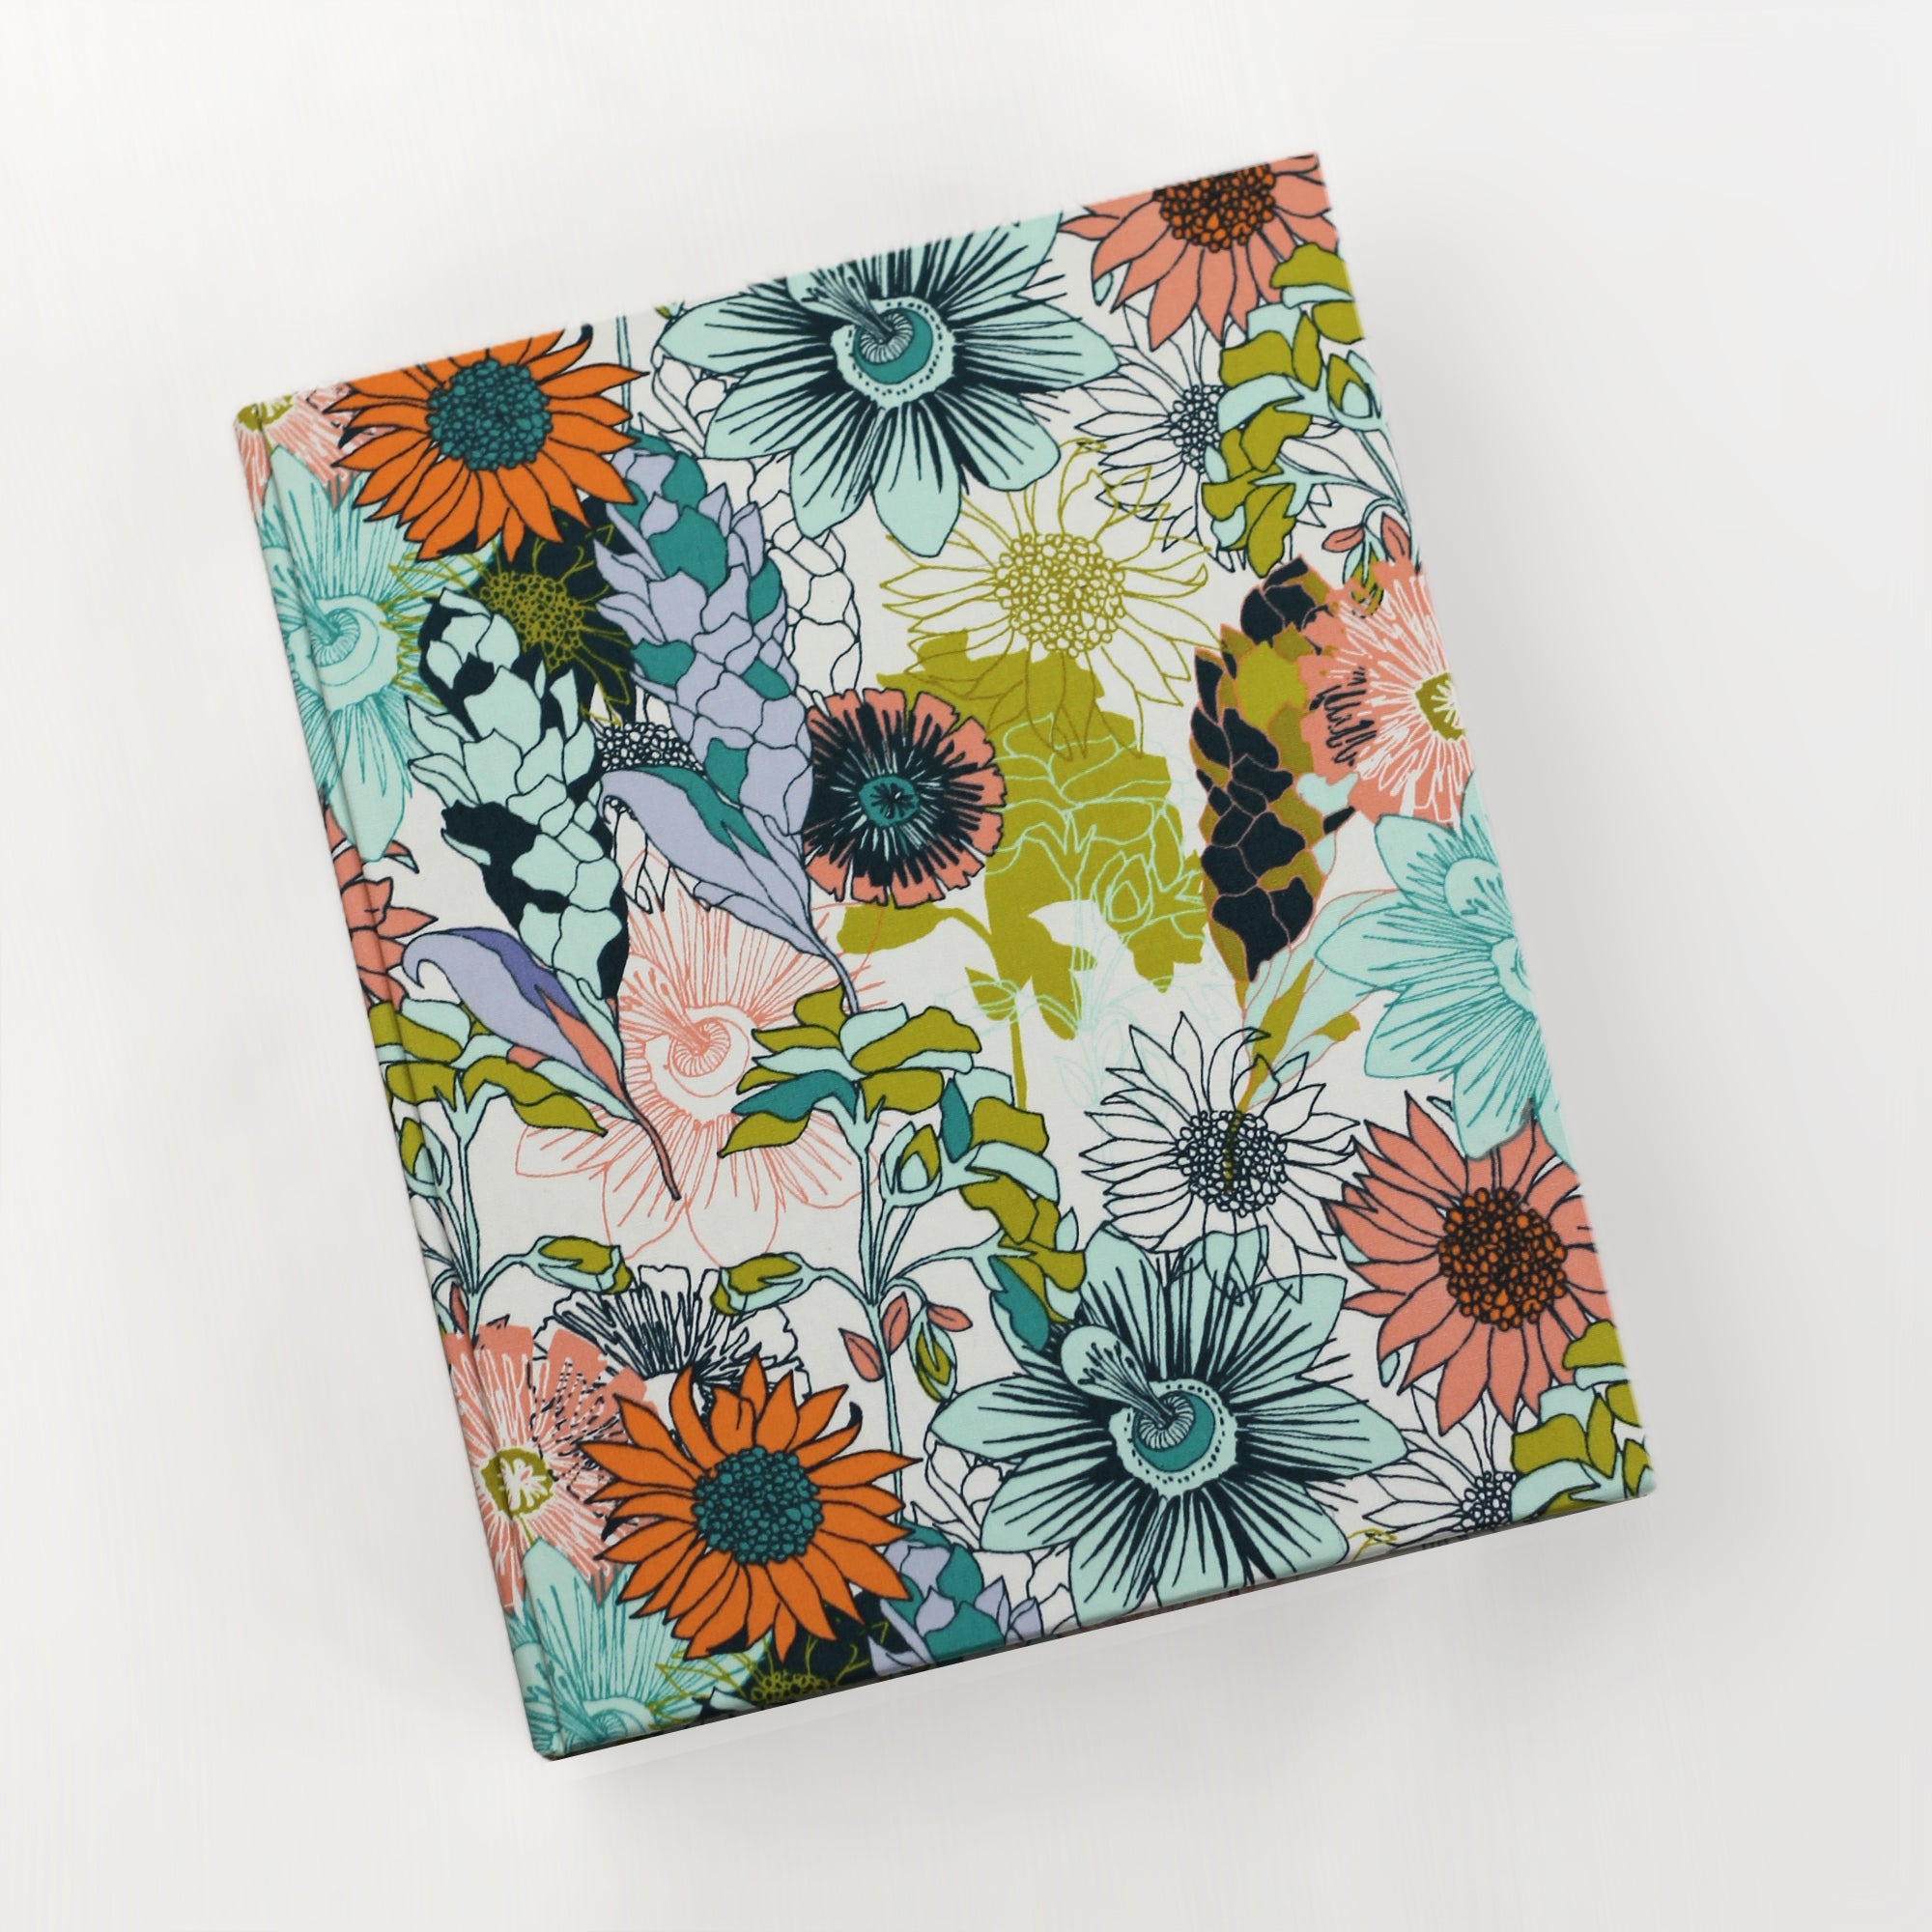 Handmade Floral Printed Cover Journal Writing Diary Vintage Blank